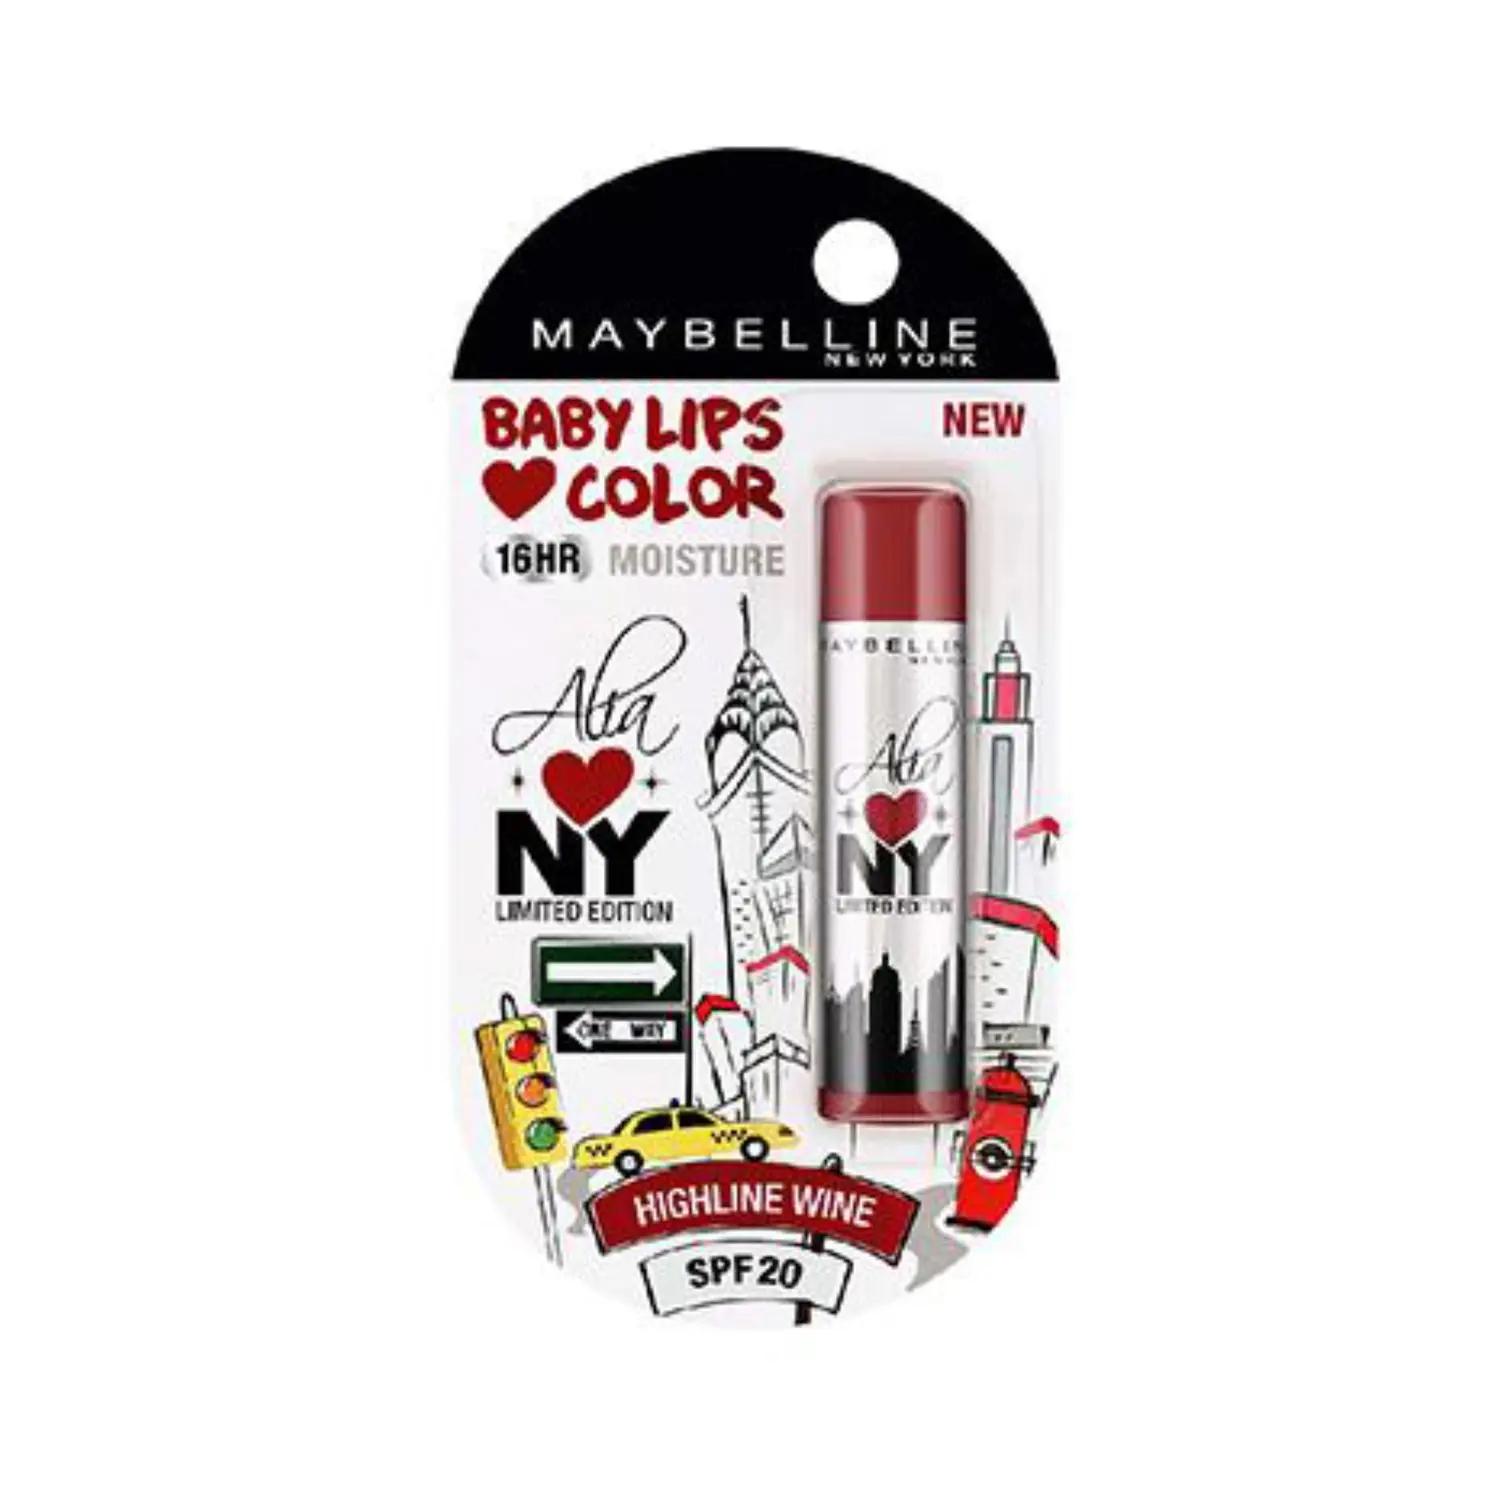 maybelline new york baby lips colour limited edition lip balm - highline wine (4g)